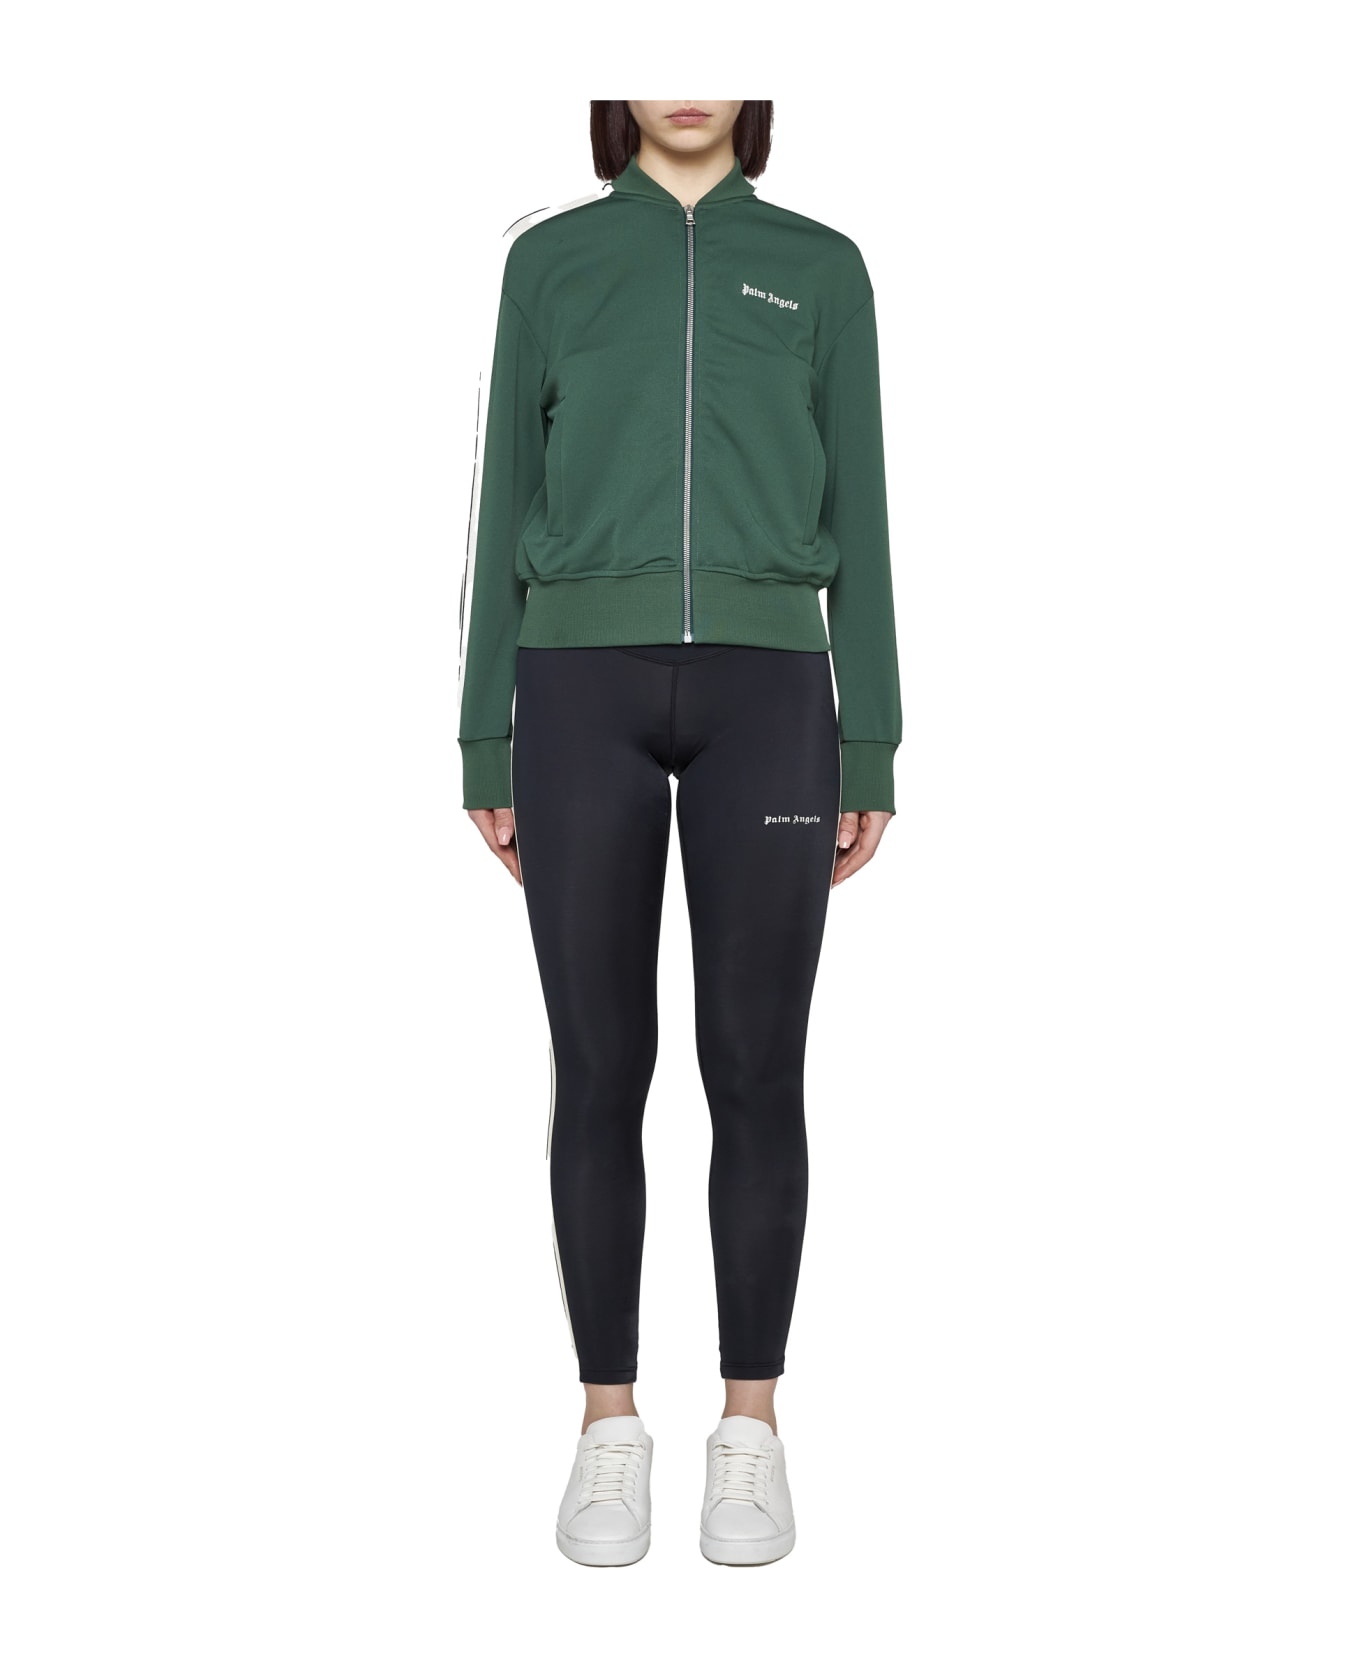 Palm Angels Fleece - Forest green off white